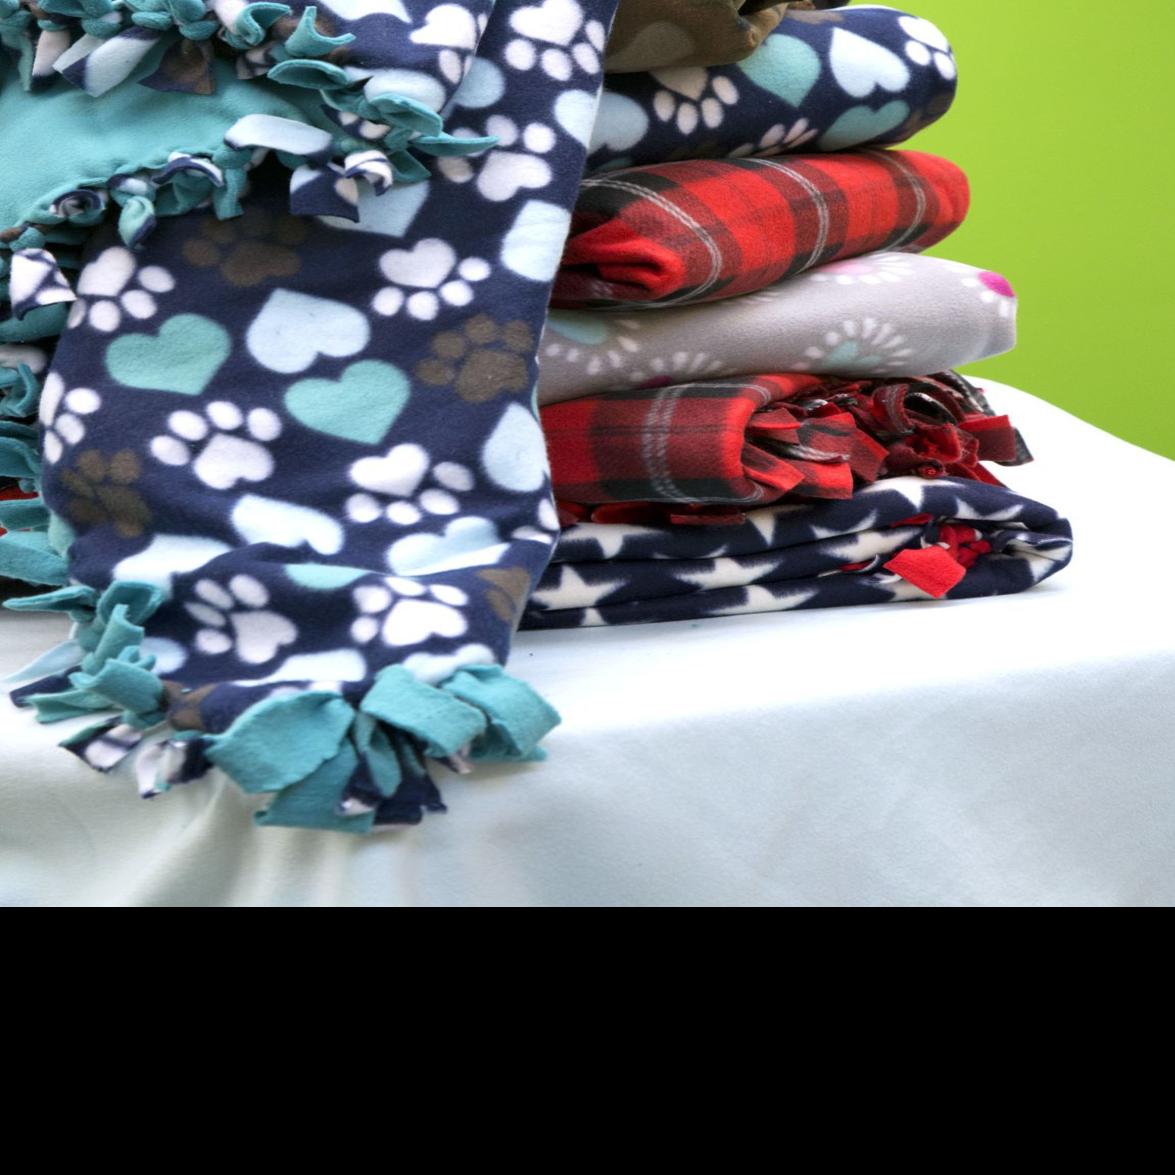 Cozy Up To These No Sew Fleece Blankets The Entire Family Can Make Together Momaha Omahacom